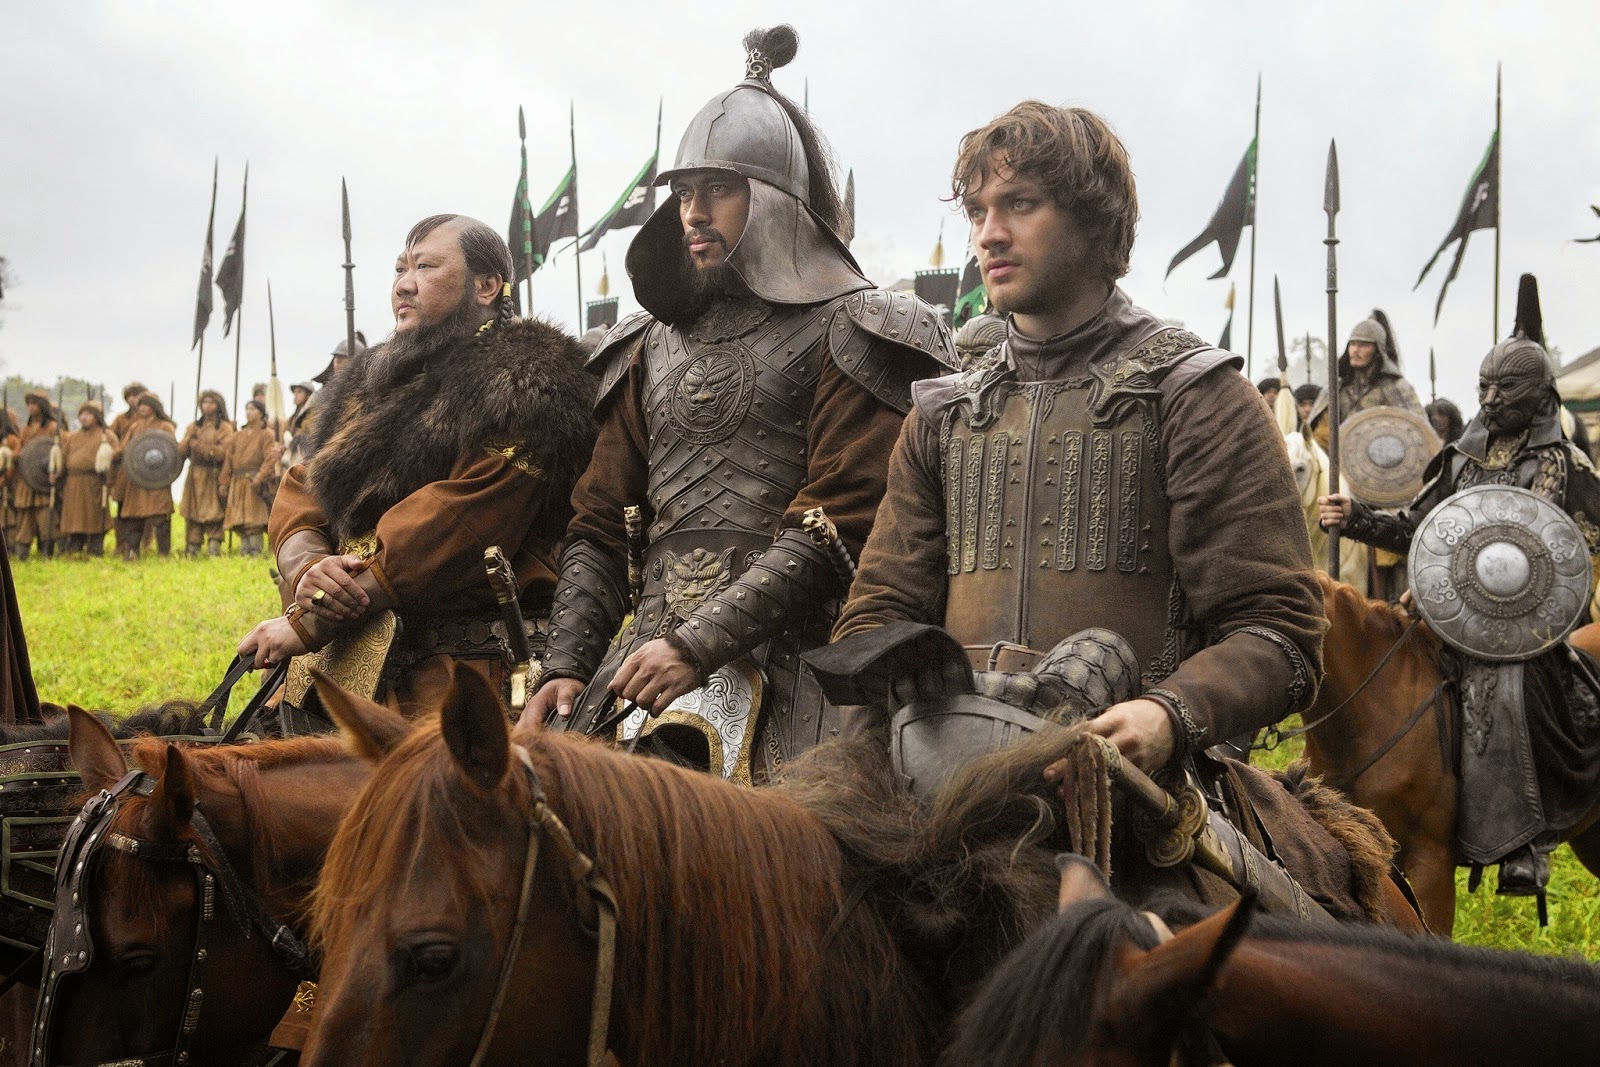 http://www.examiner.com/article/netflix-marco-polo-created-by-john-fusco-is-renewed-for-season-2